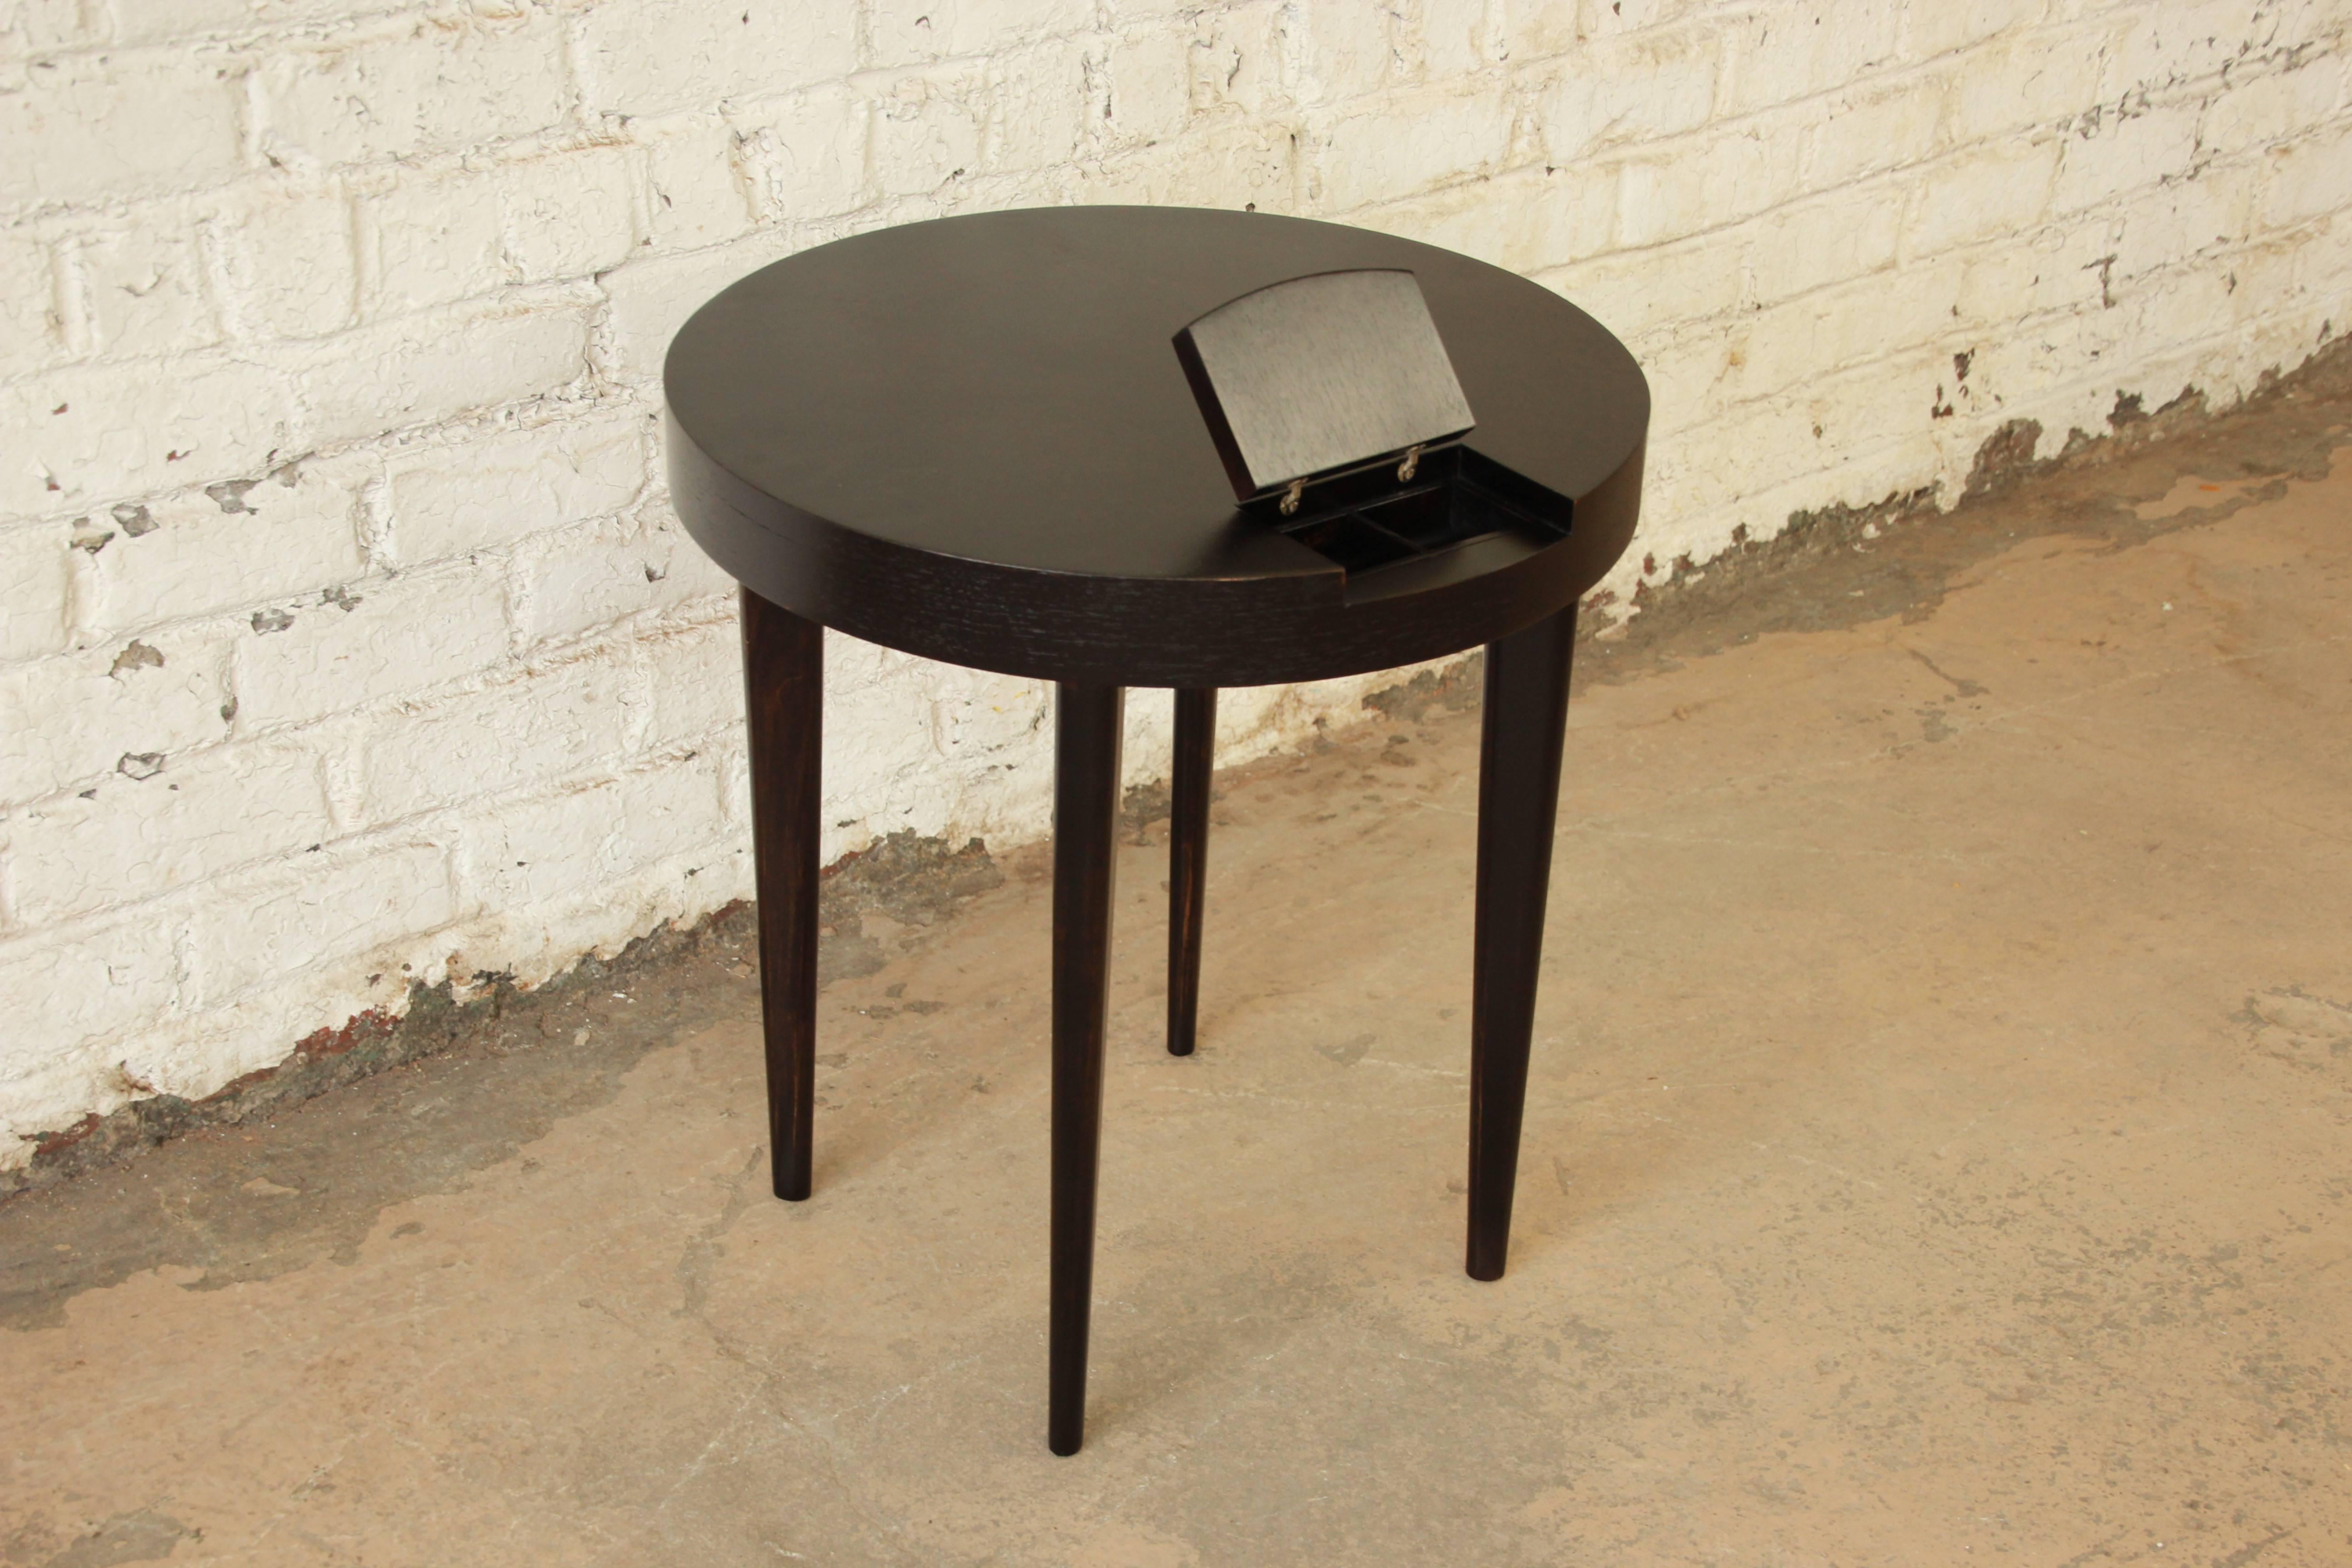 Exceptional Mid-Century ebonized round occasional table by iconic designer Gilbert Rohde for Herman Miller. The table features sleek, Minimalist lines and a beautiful ebonized finish. It has a unique hidden flip-up storage compartment. The table has